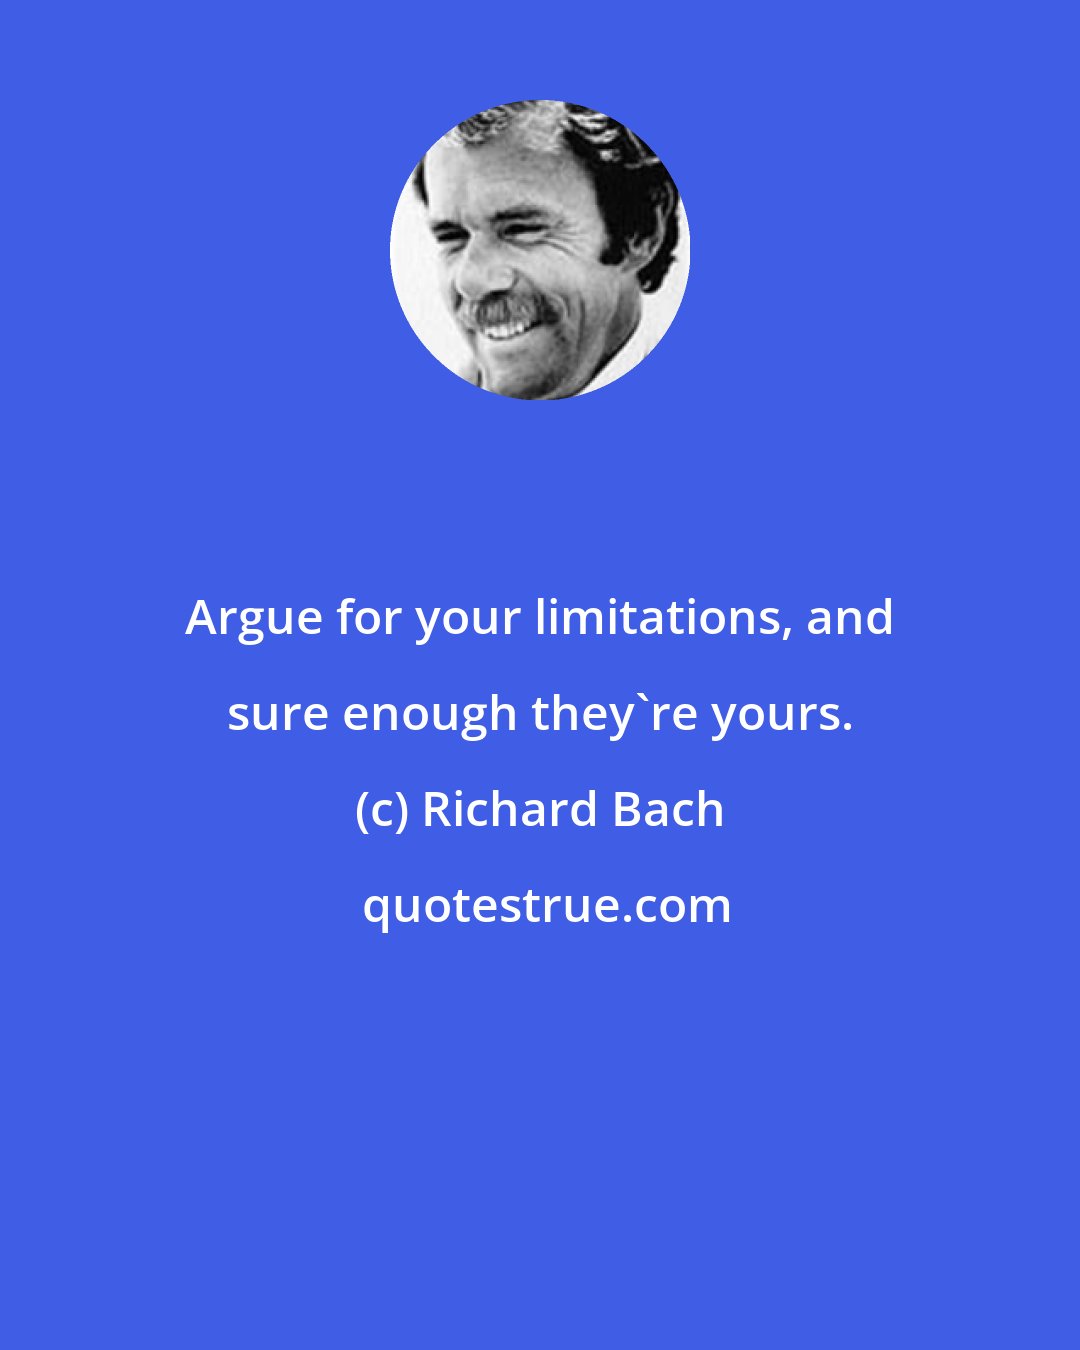 Richard Bach: Argue for your limitations, and sure enough they're yours.